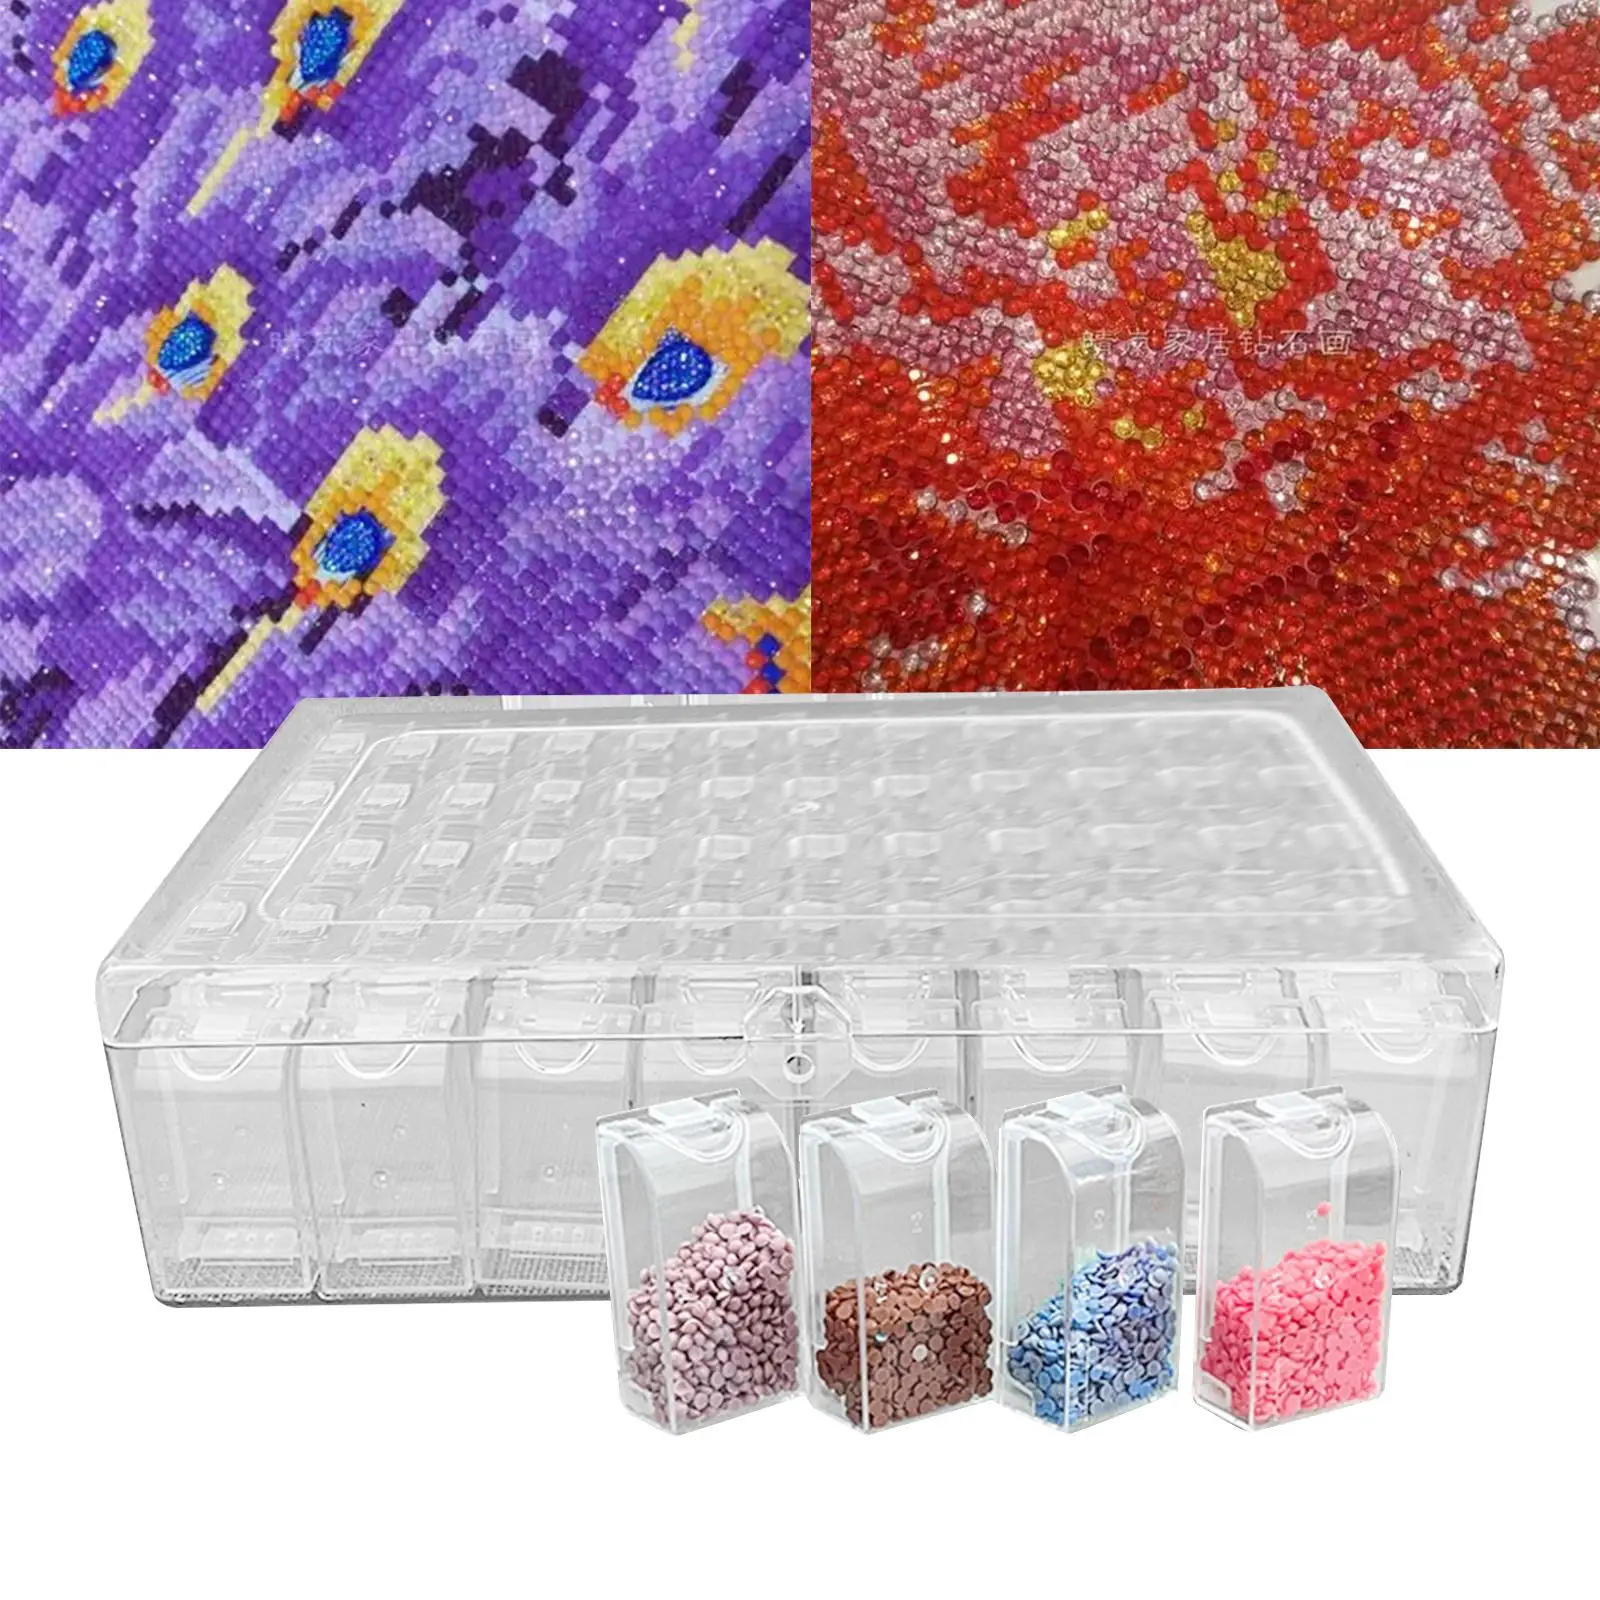 Organizer Box with Diamond Painting Tray Plastic Compartments Case Crafts Bead Storage Containers Set for Sewing DIY Crafts Bead